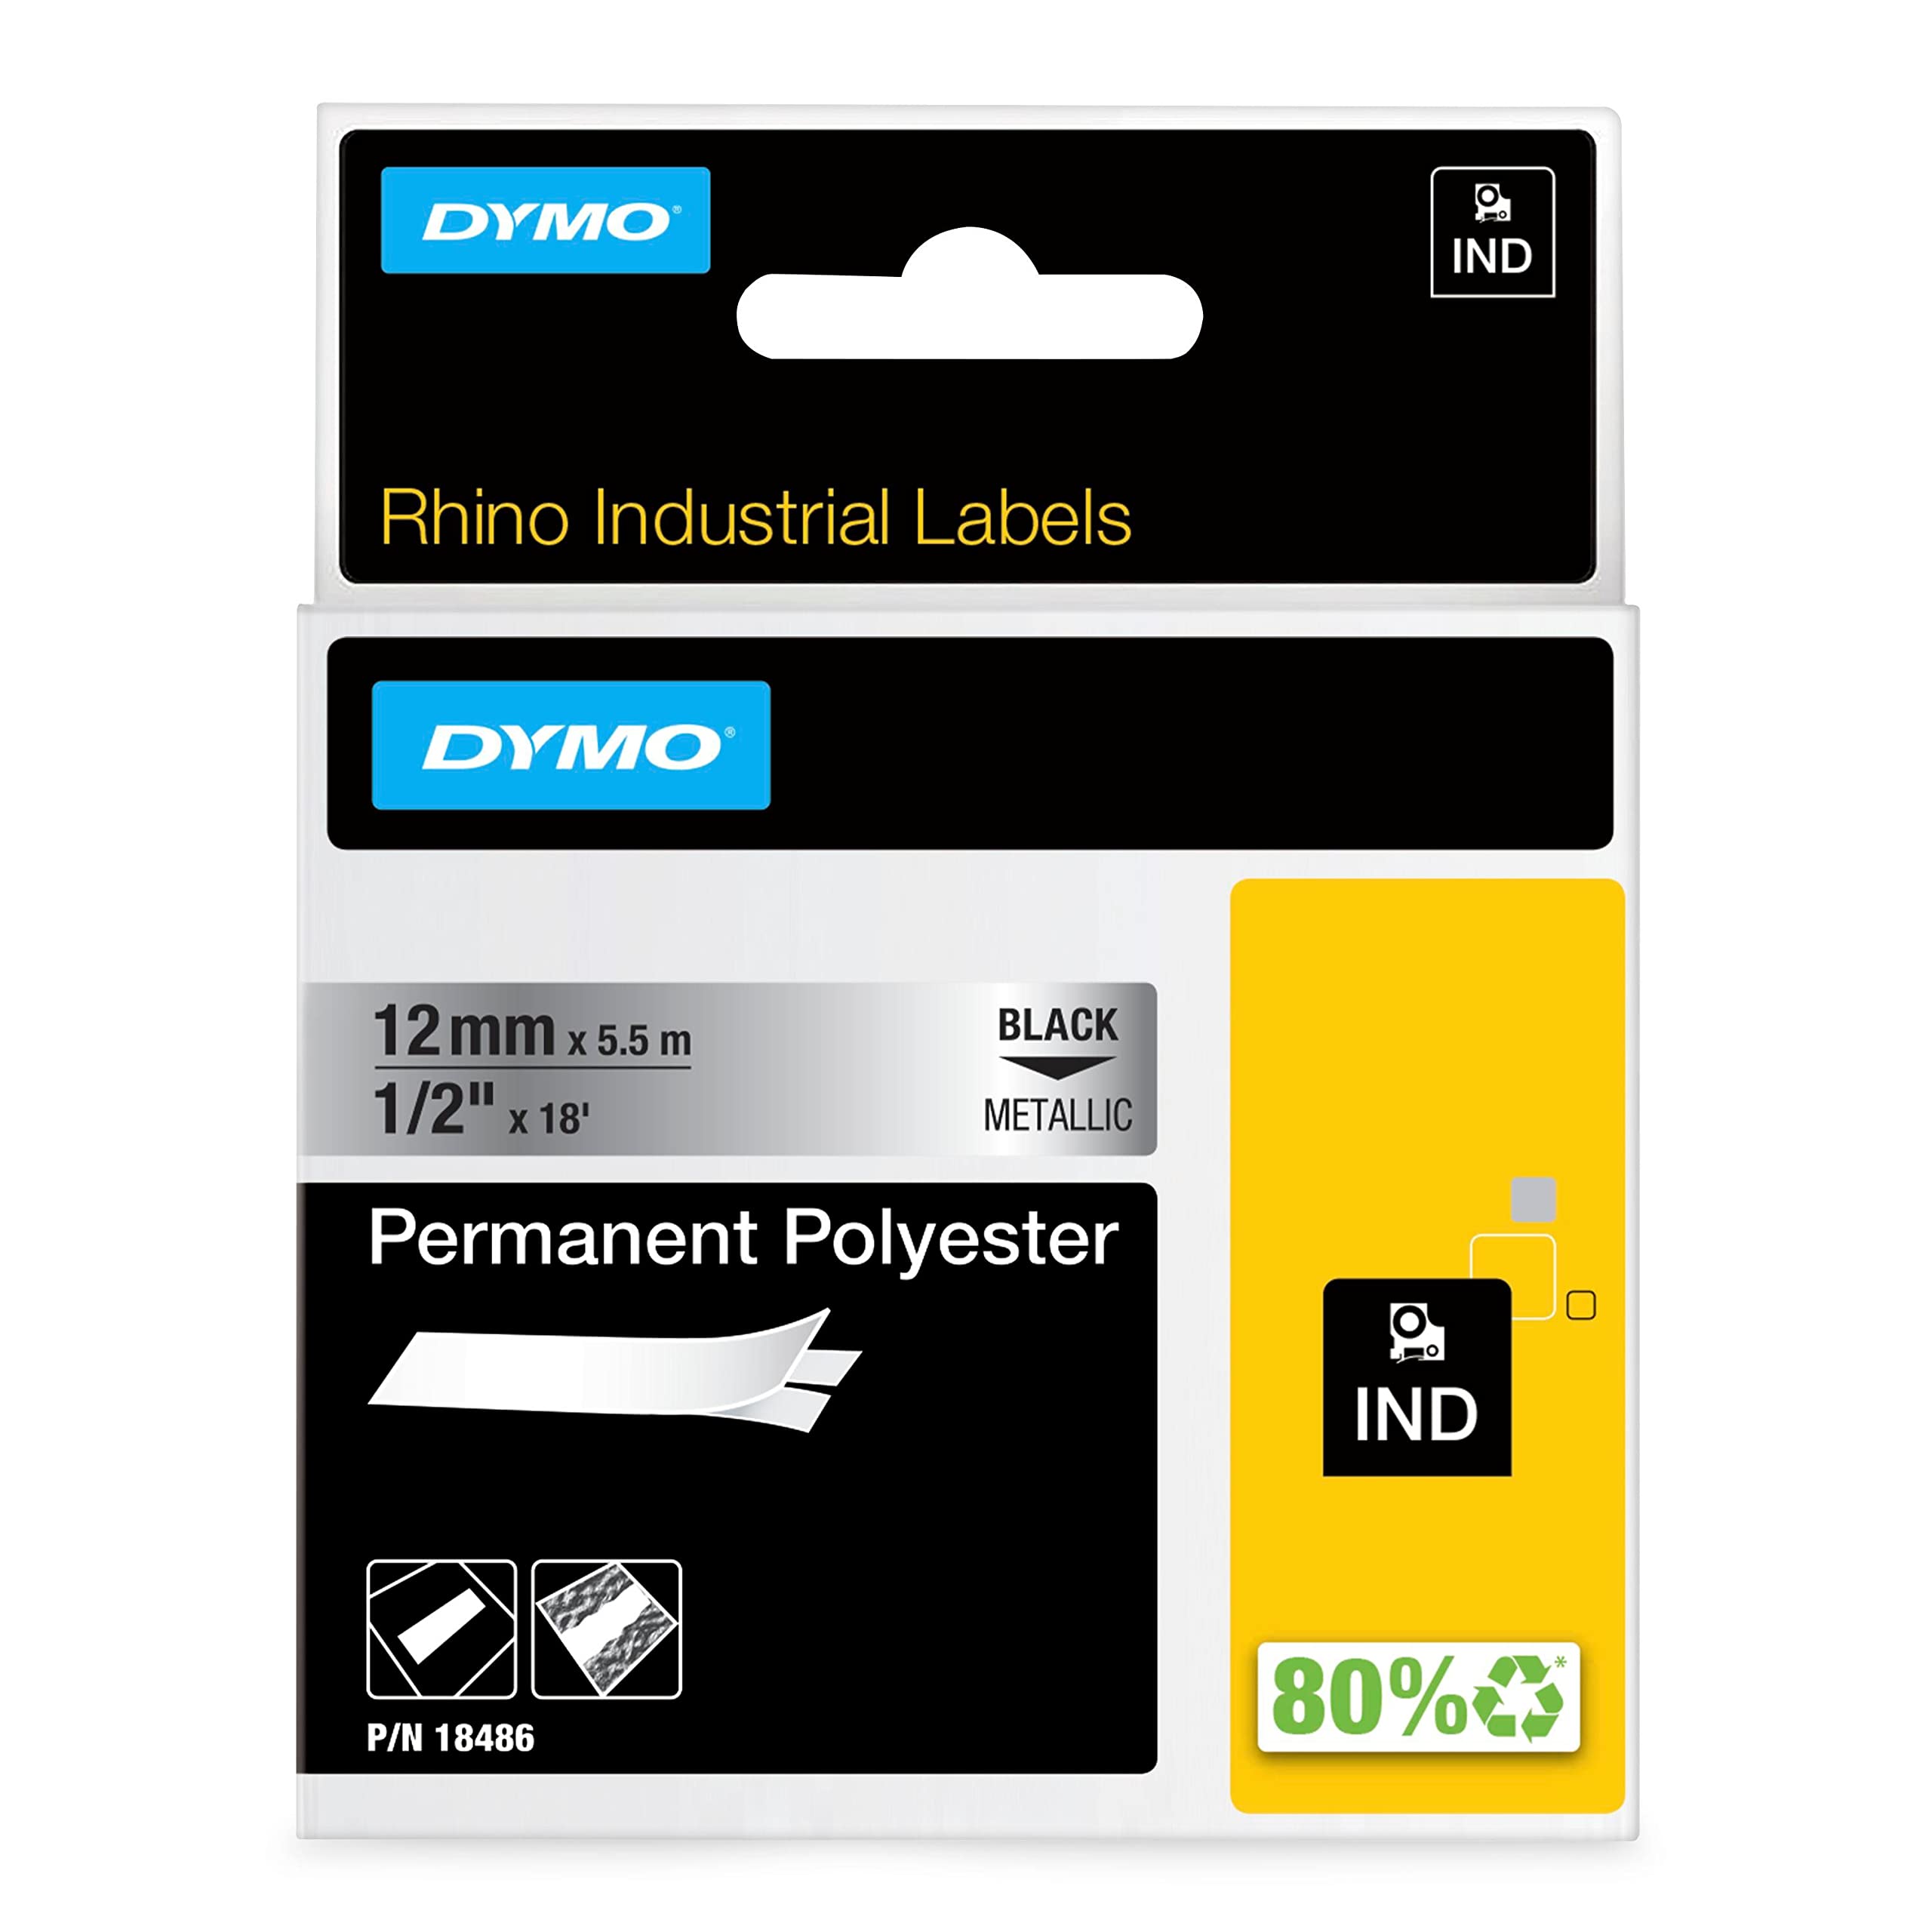 DYMO Industrial Permanent Labels for DYMO LabelWriter and Industrial RhinoPro Label Makers, Black on Metallic, 1/2